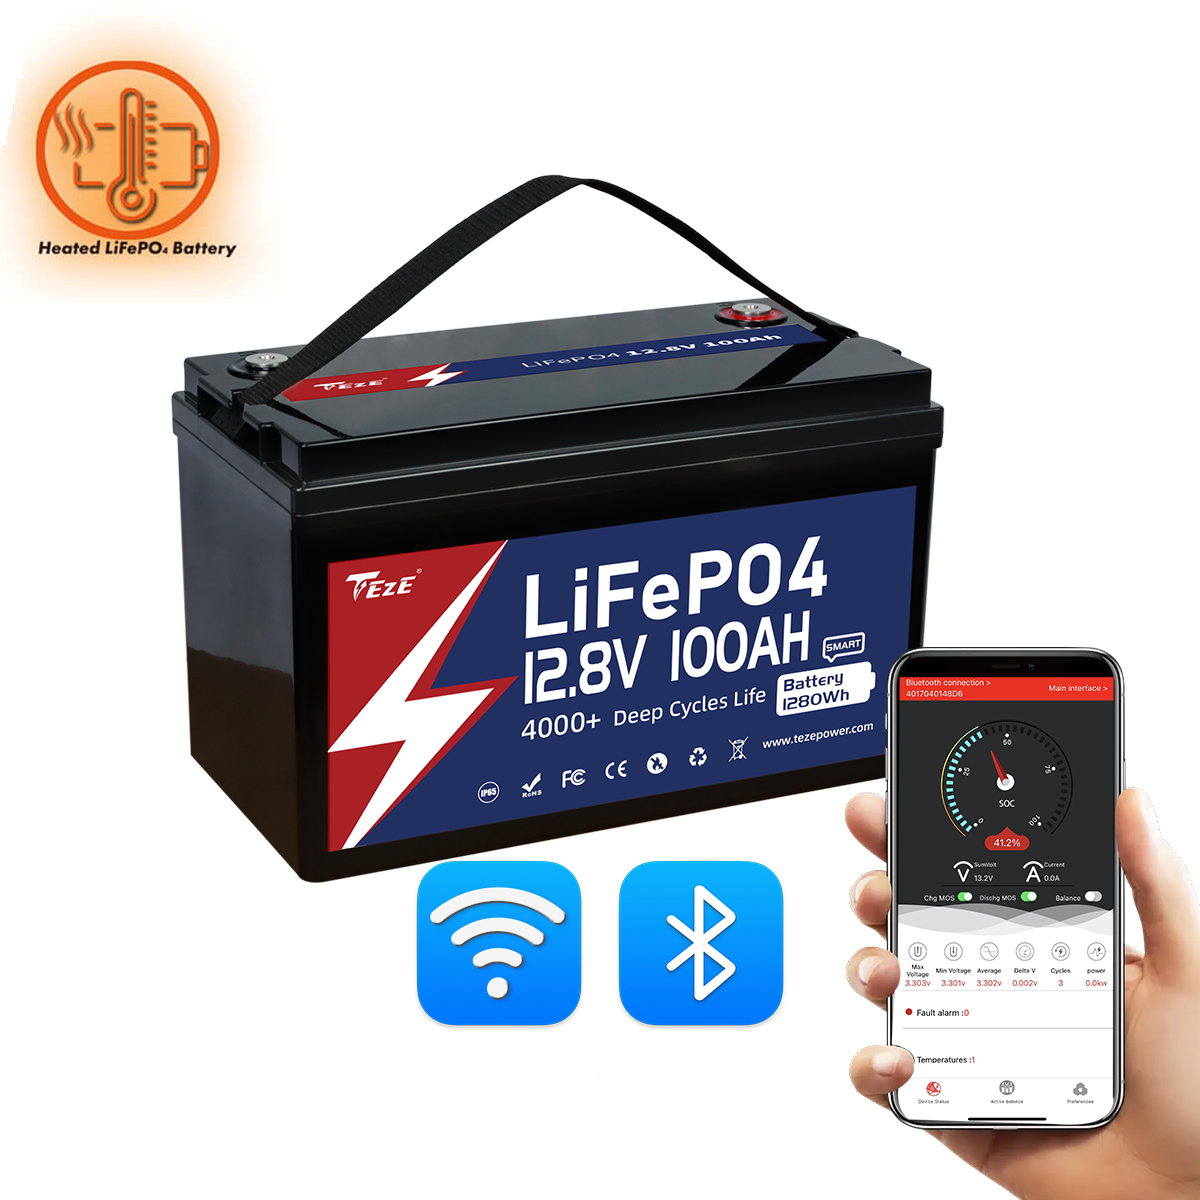 New Add WiFi-TezePower 12V 100Ah LiFePO4 Battery with WIFI and Bluetooth, Self-heating and Active Balancer, Built-in 100A Daly BMS(WIFI Built-in Version)